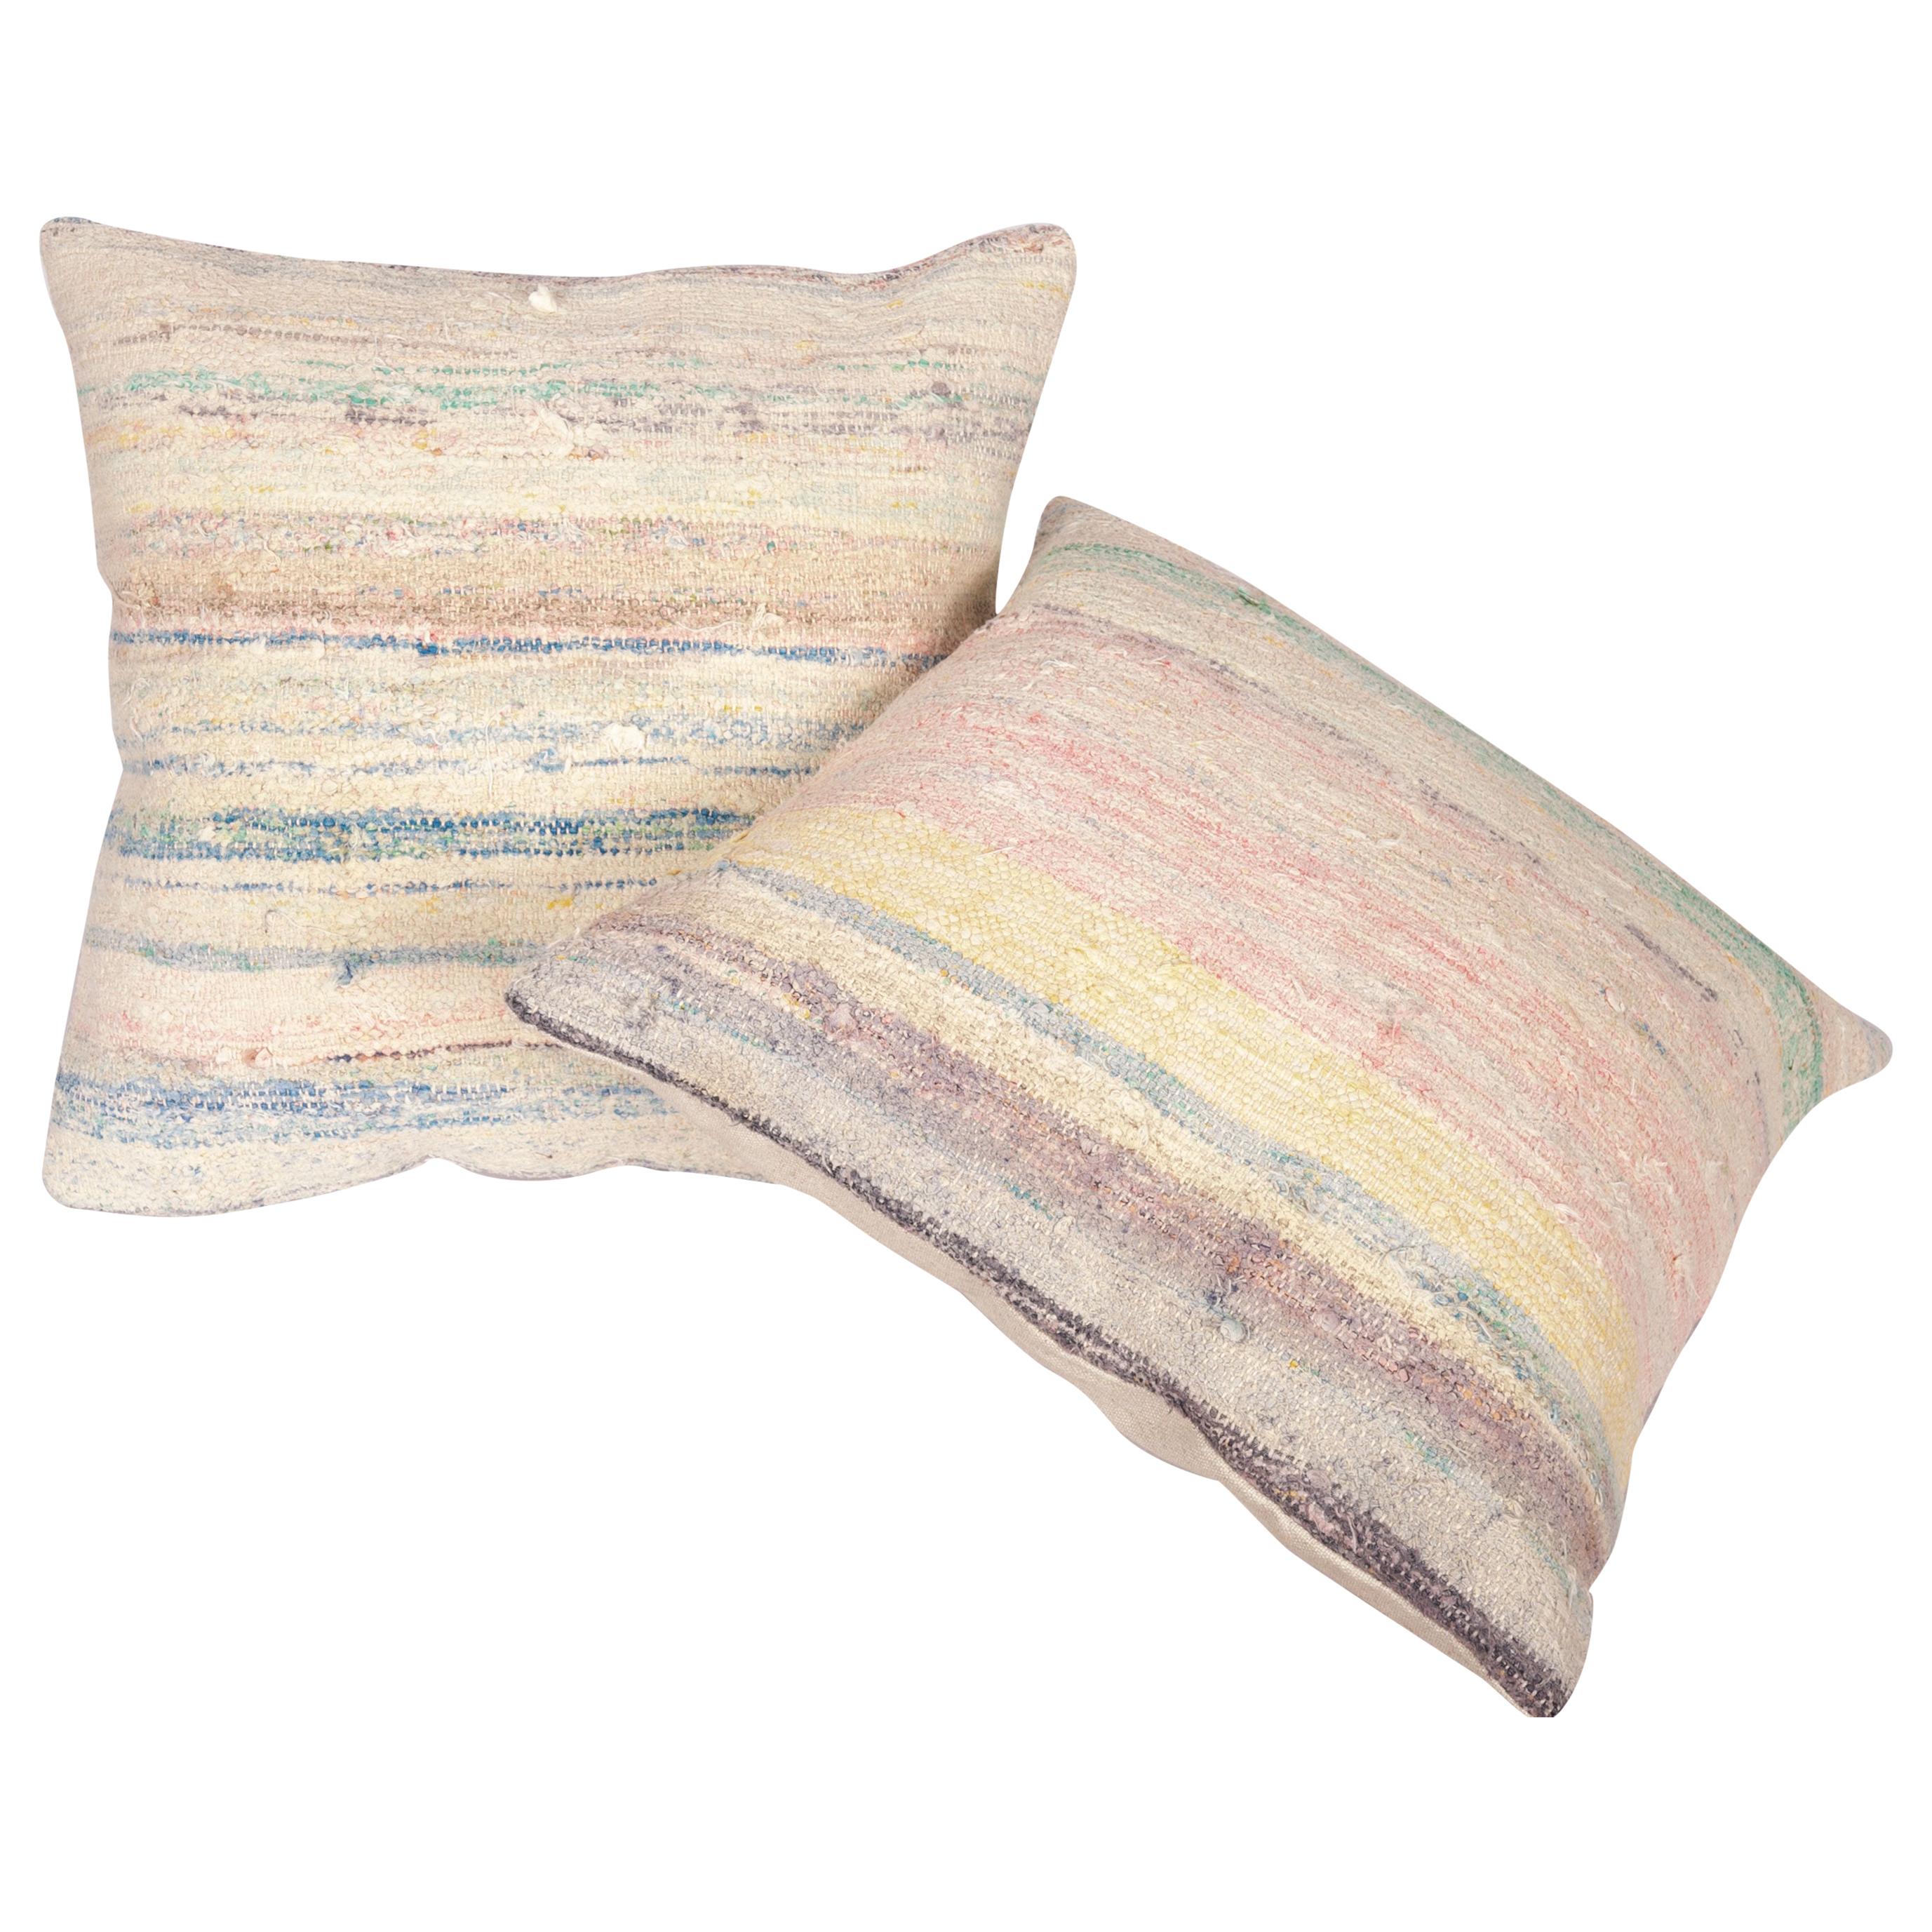 Rustic Pillow Cases Made from an Anatolian Rag Rug, Mid-20th Century For Sale